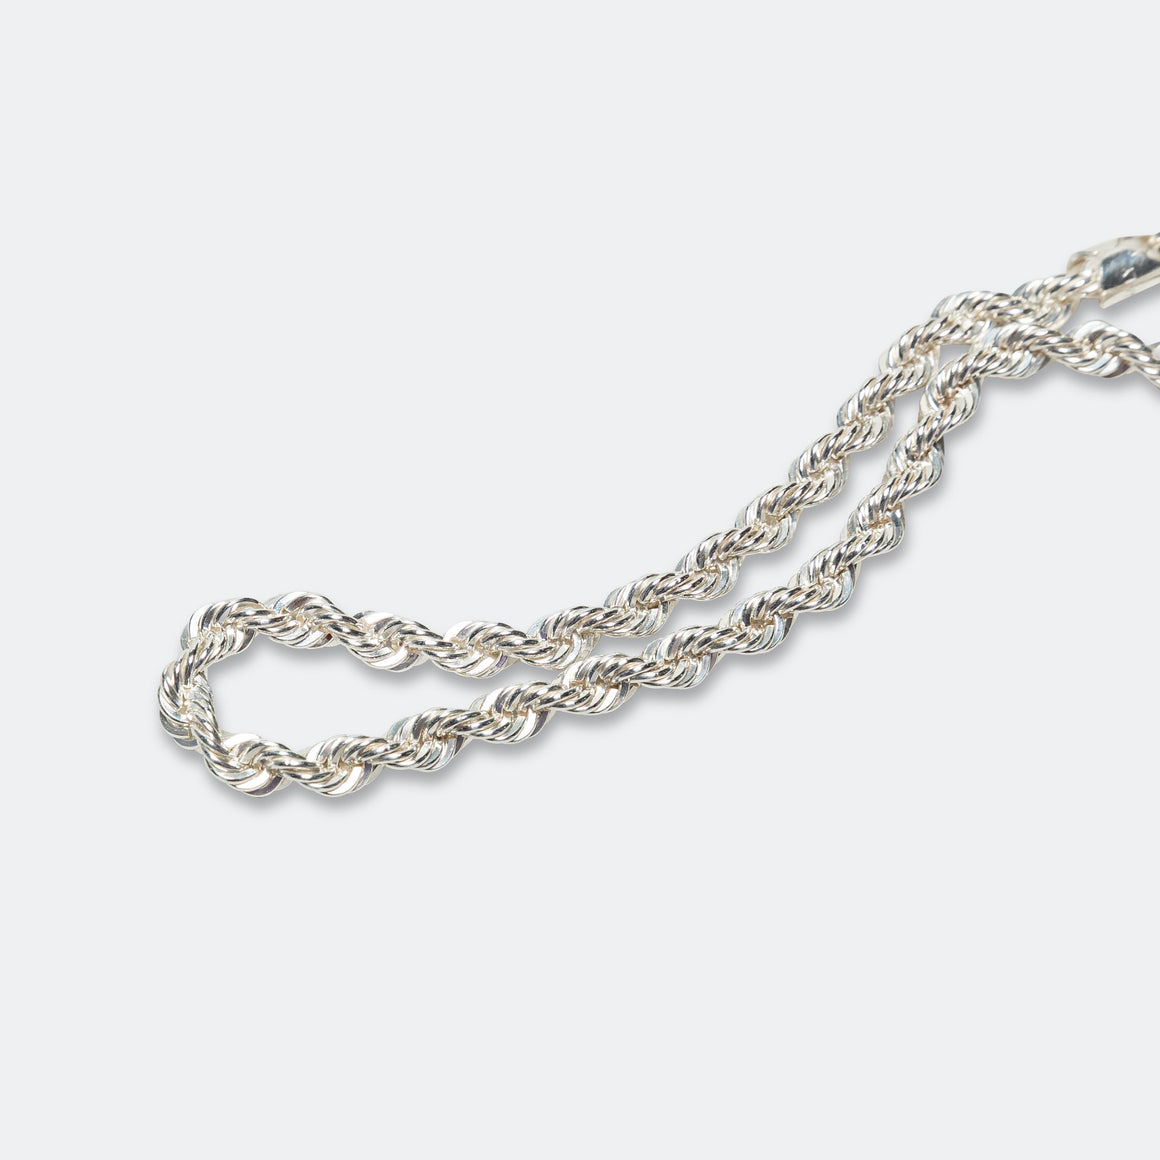 Pseushi - Rope Chain Bracelet - 925 Silver - UP THERE